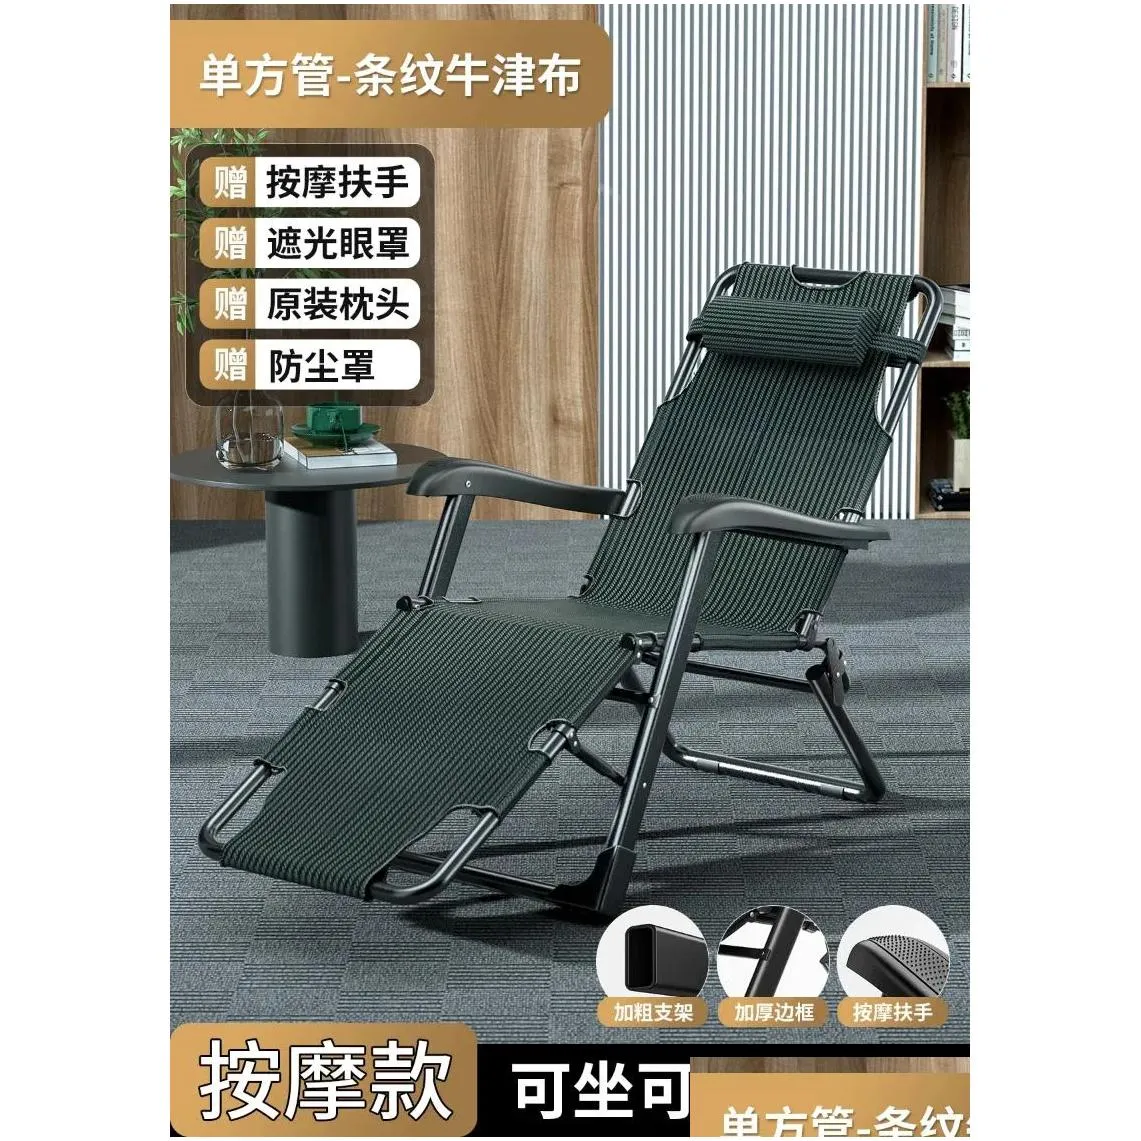 Camp Furniture Living Room Luxury Recliner Office Chair Metal Nook Industrial Unique Camping Minimalist Poltrona Relax Modern